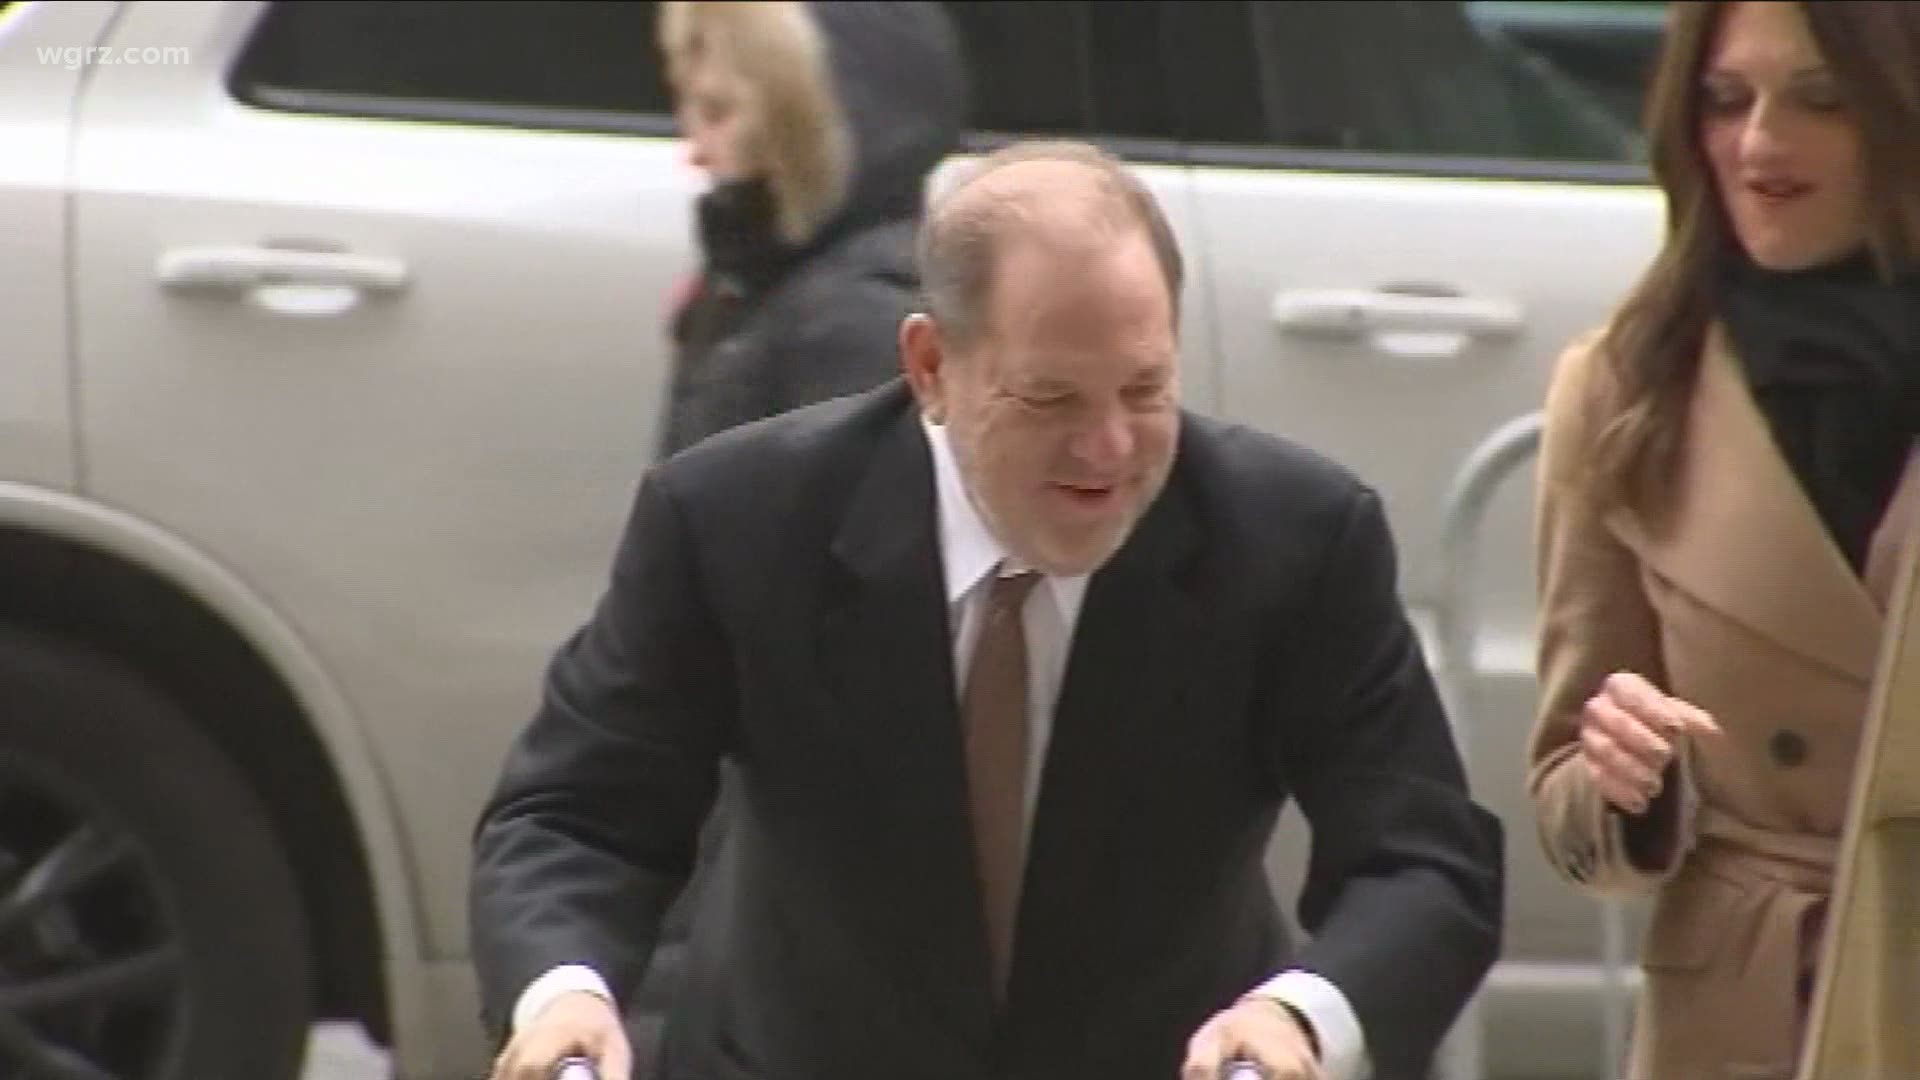 Disgraced film producer Harvey Weinstein is scheduled to appear virtually before an Erie County Judge tomorrow for an extradition hearing.